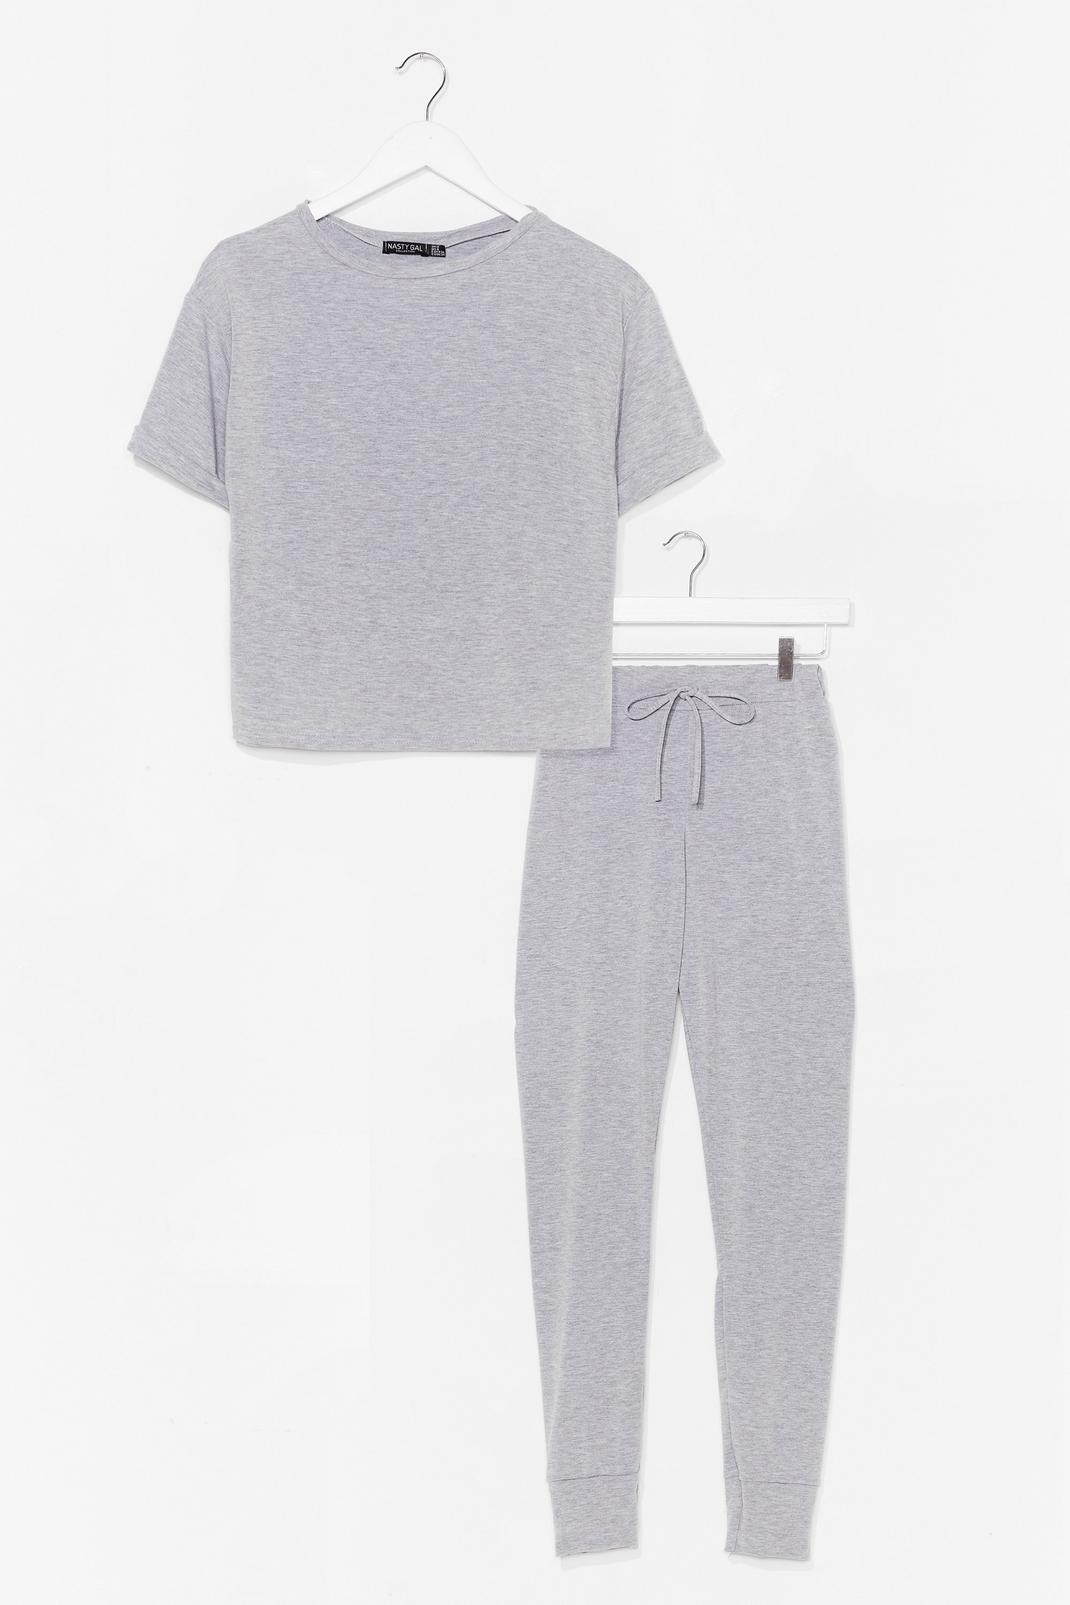 Grey marl T-Shirt and Fitted Joggers Pyjama Set image number 1